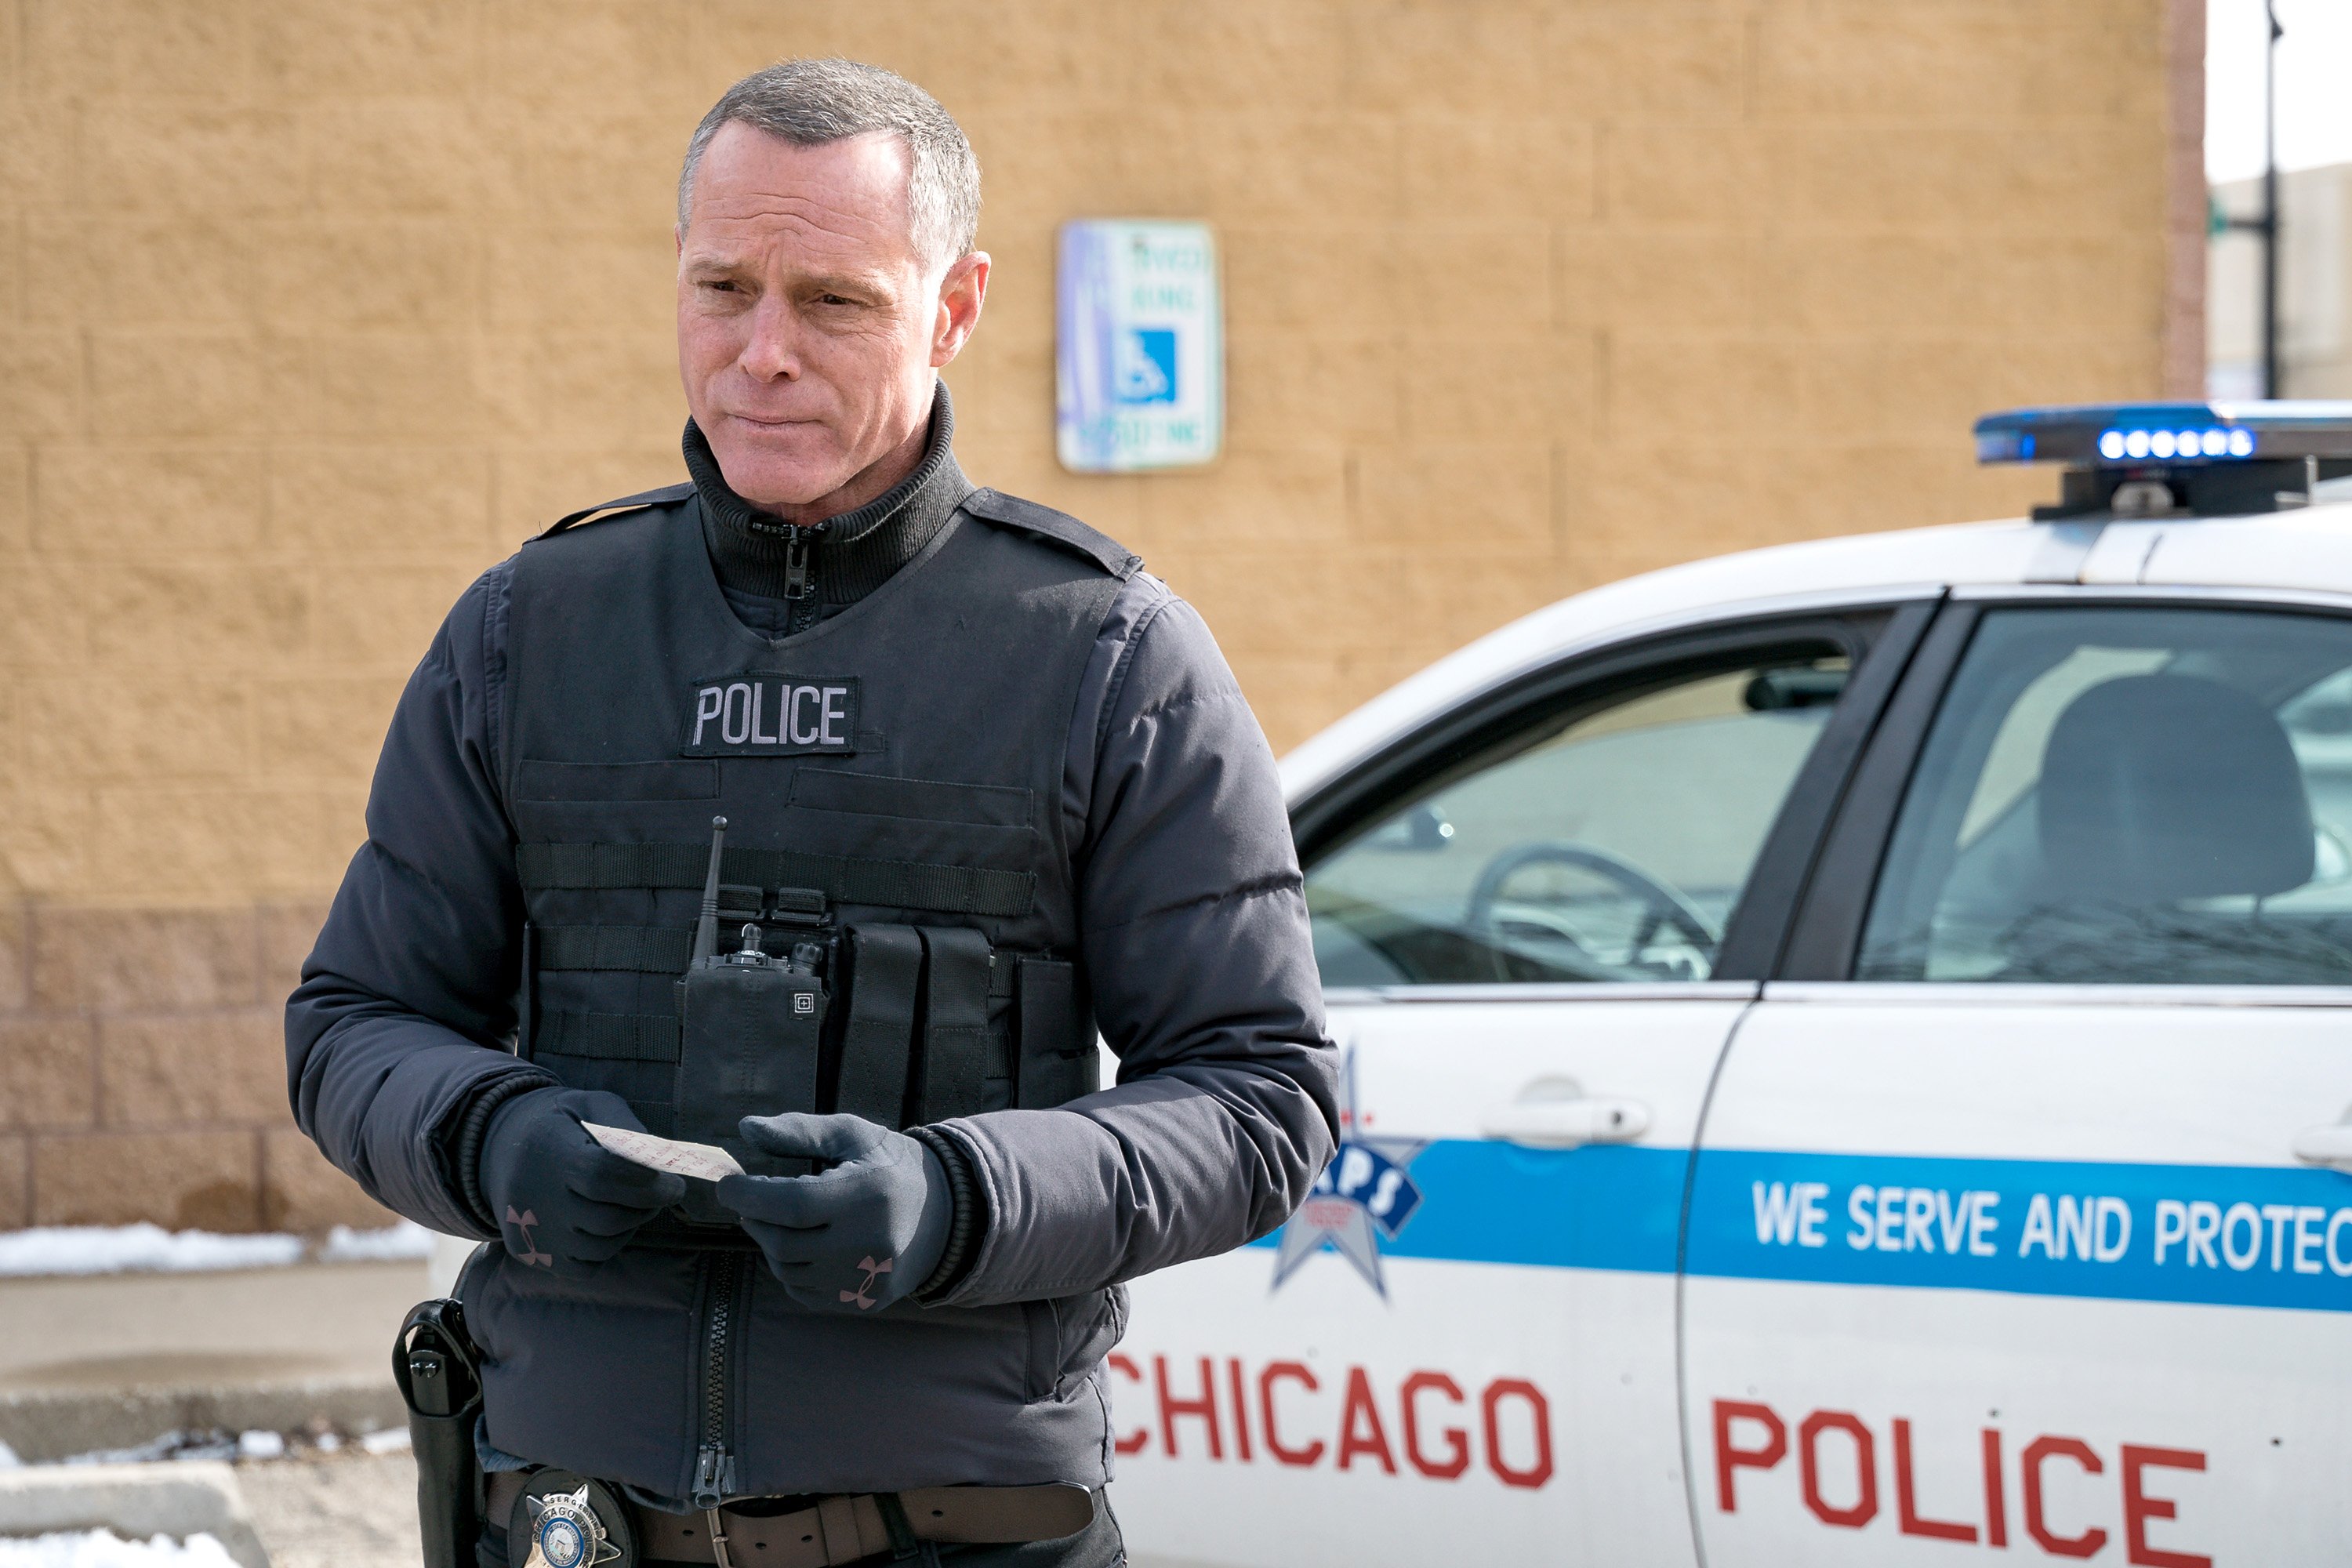 Jason Beghe in season 5 of "Chicago PD" on March 20, 2018 | Source: Getty Images